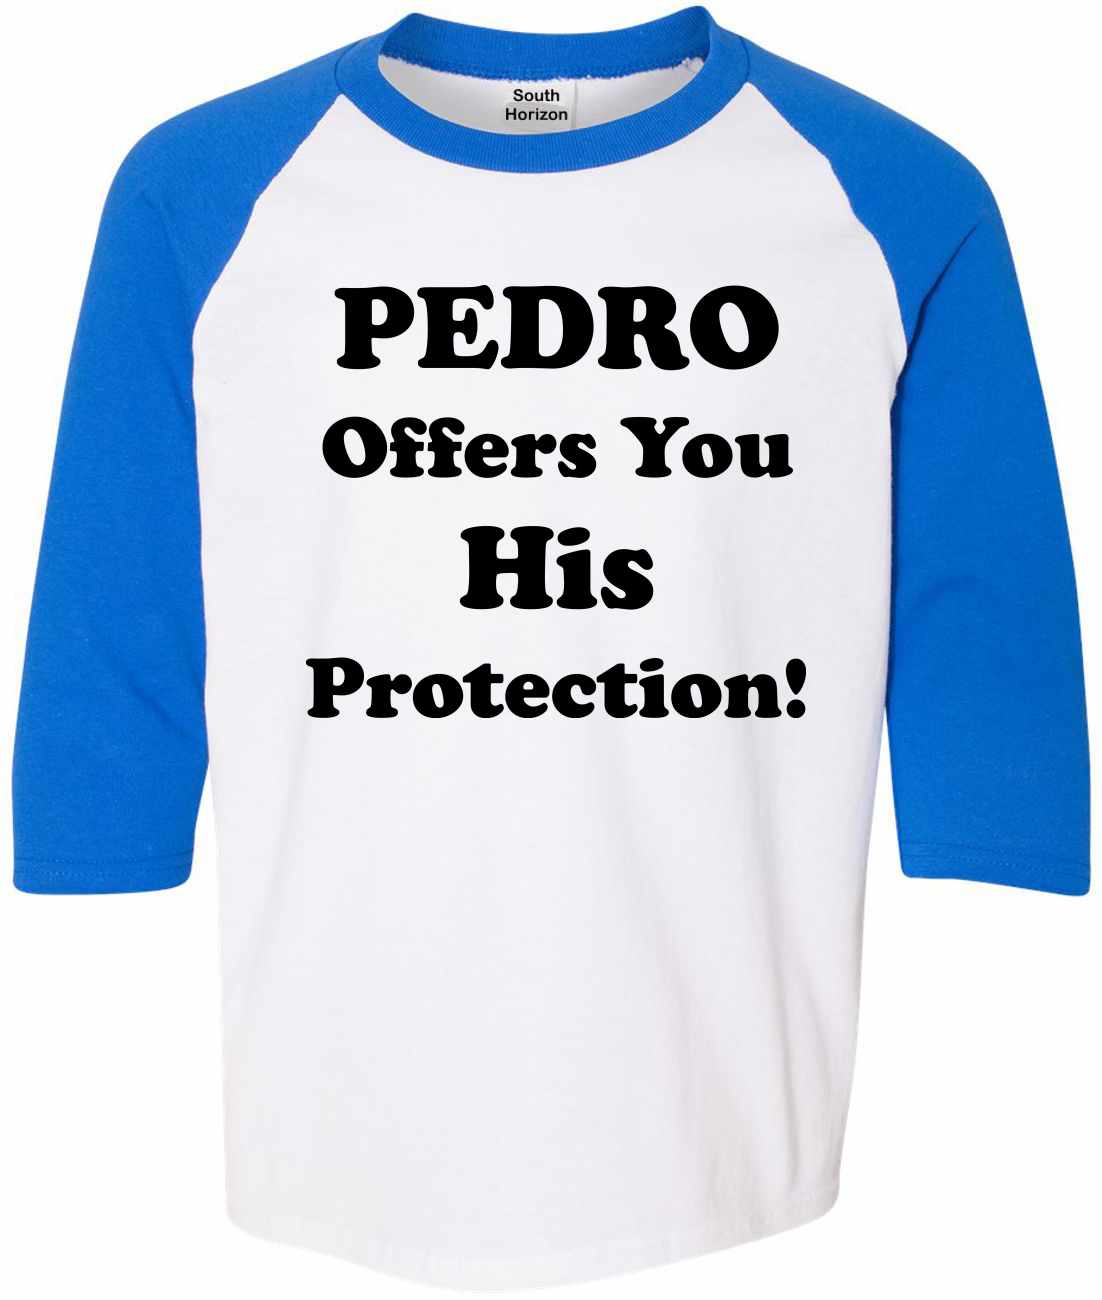 PEDRO OFFERS YOU HIS PROTECTION on Youth Baseball Shirt (#385-212)